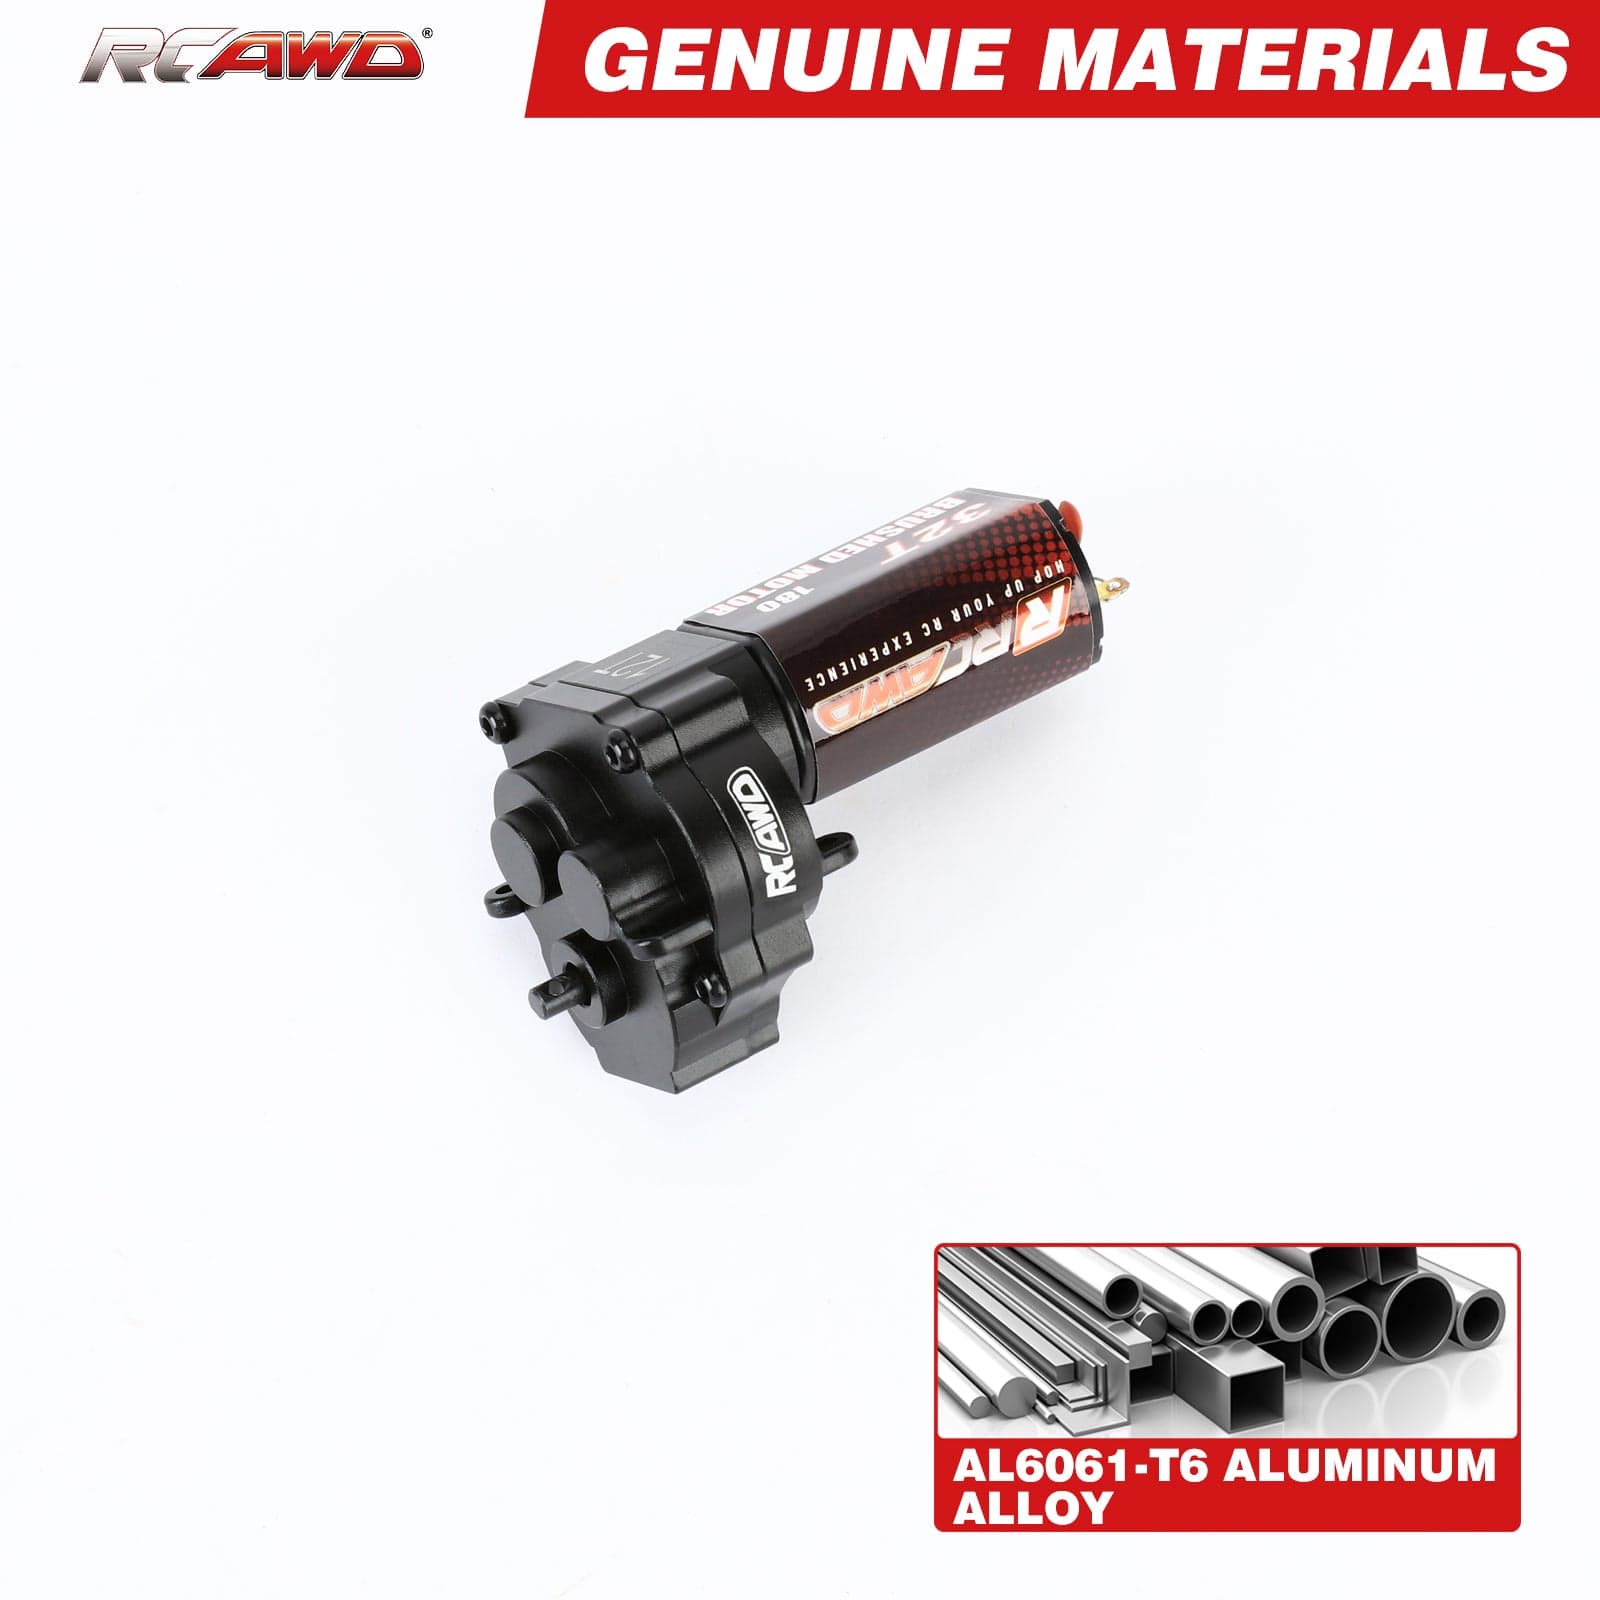 RCAWD Steel Gear Aluminum Complete Transmission with 32T 180 Motor for 1/18 TRX4M Upgrades - RCAWD